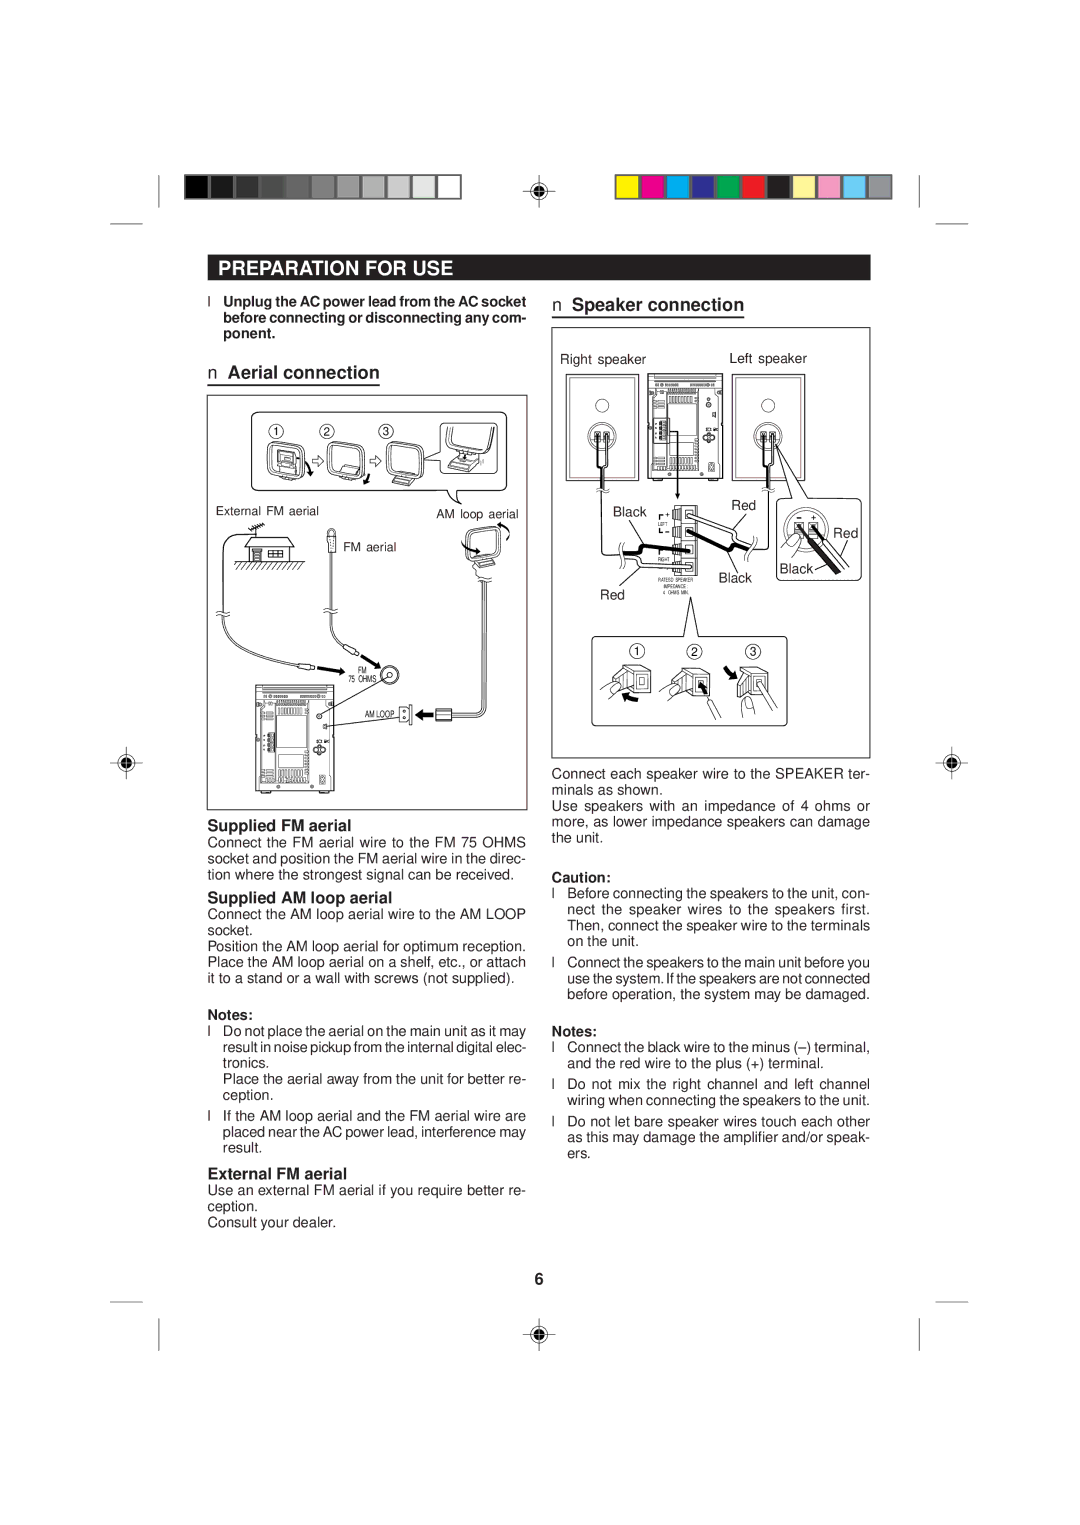 Sharp MD-M2H operation manual Preparation for USE, Aerial connection, Speaker connection 